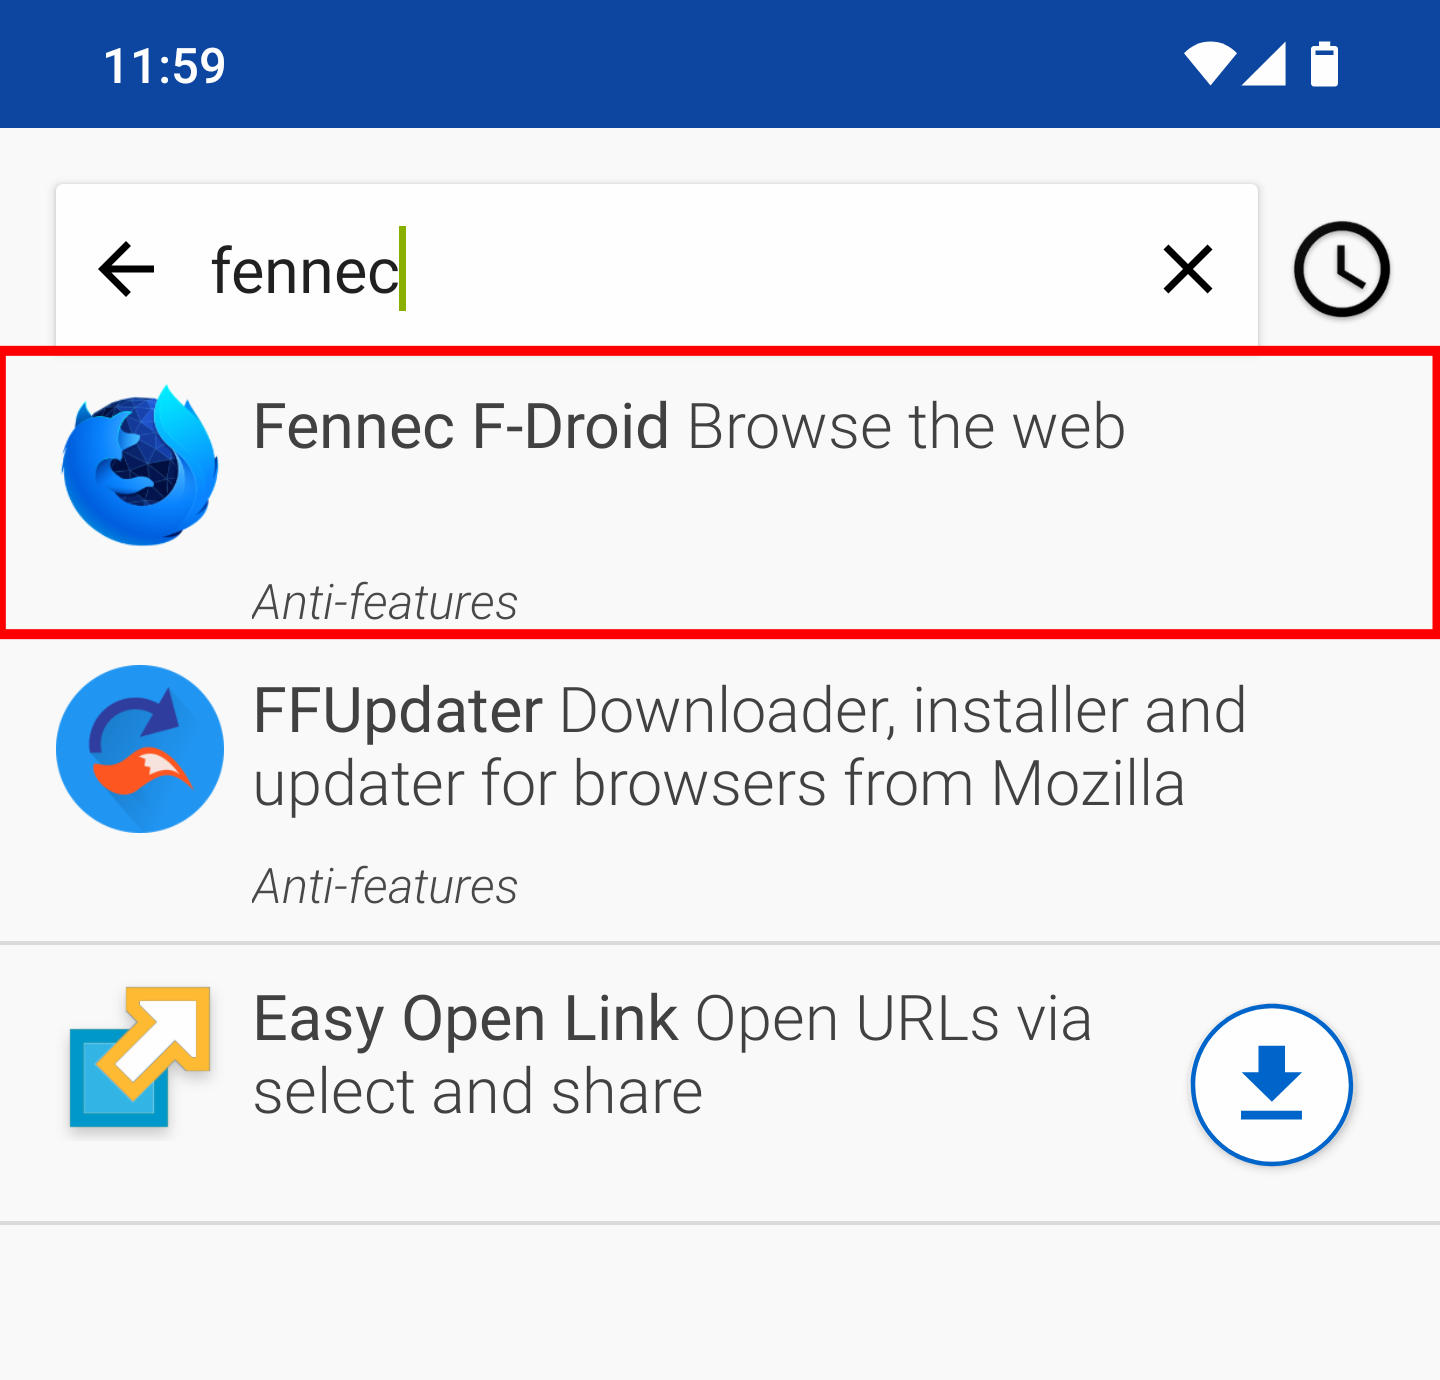 Fennec F-Droid in the search results